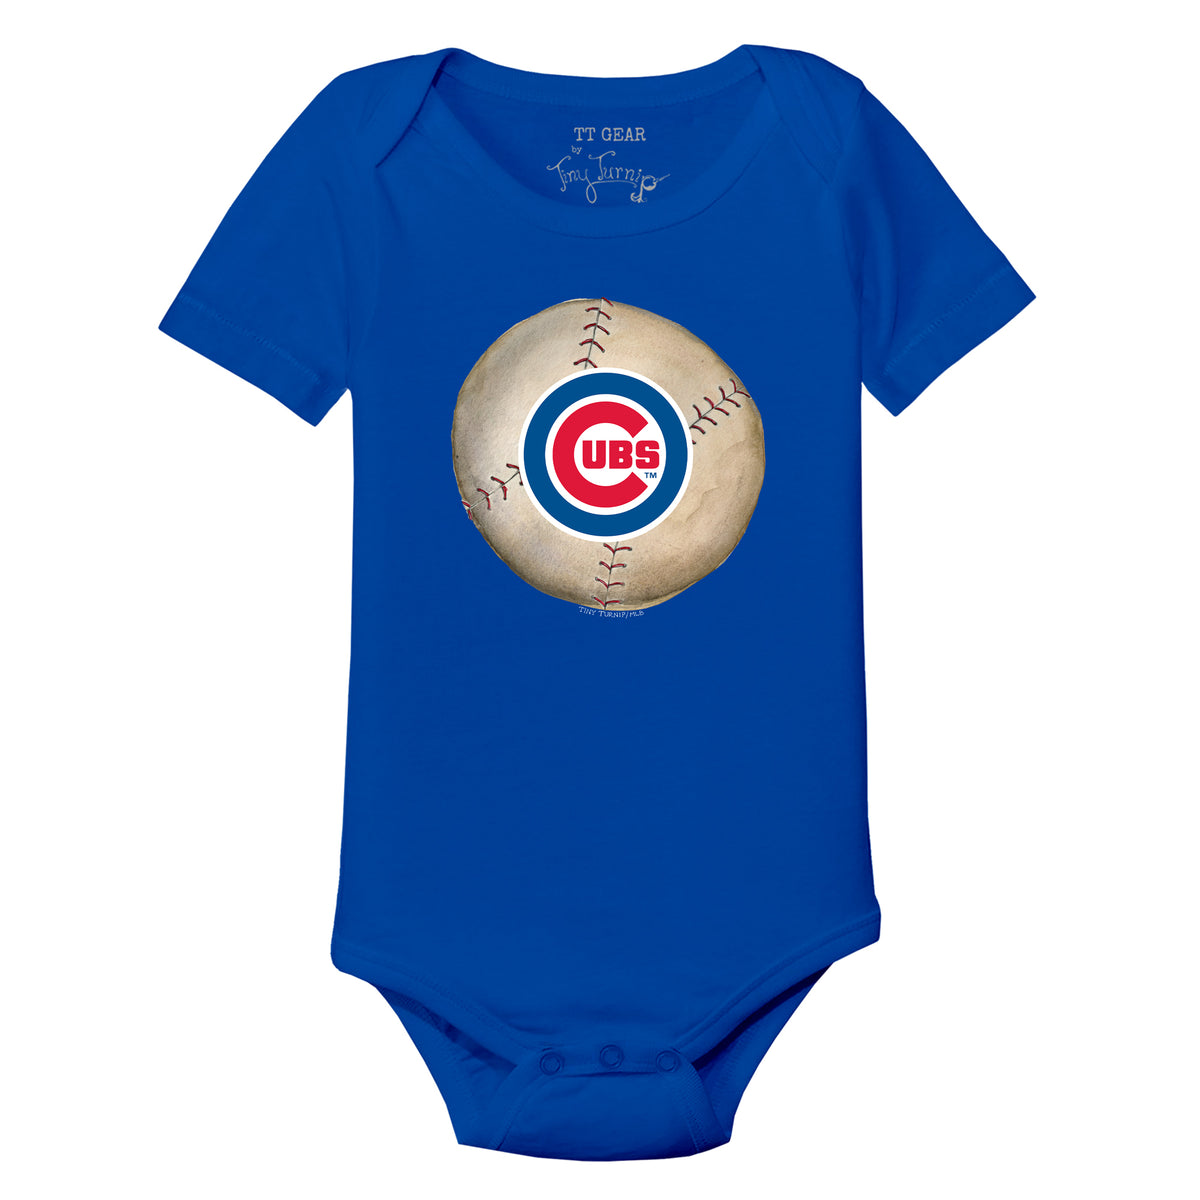 Tiny Turnip Chicago Cubs Spring Training 2023 Tee Shirt Youth Large (10-12) / White